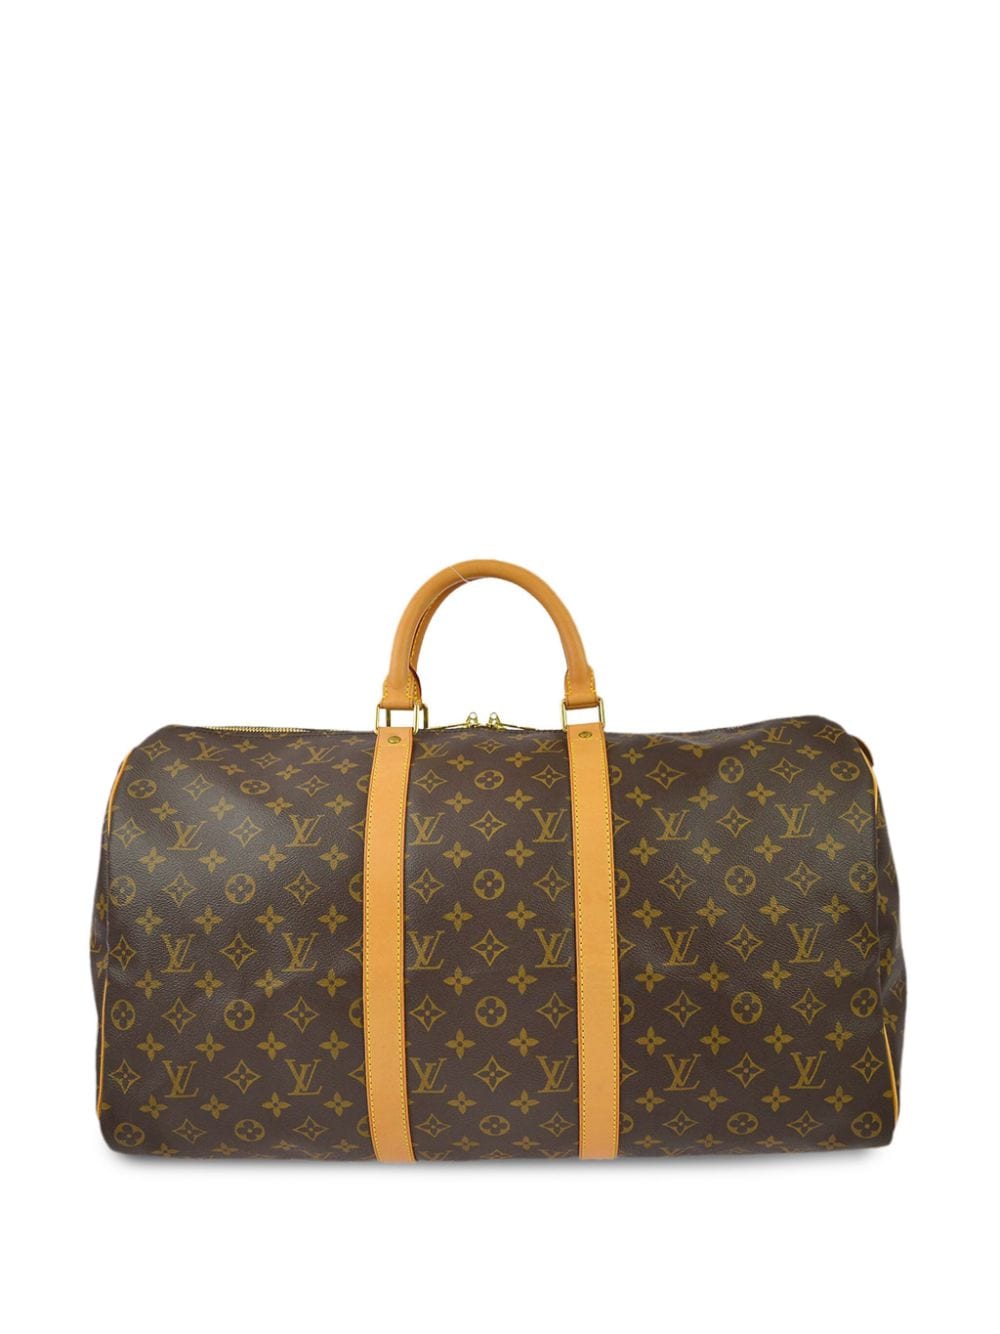 Pre-owned Louis Vuitton 2004 Keepall 50 Travel Bag In Brown